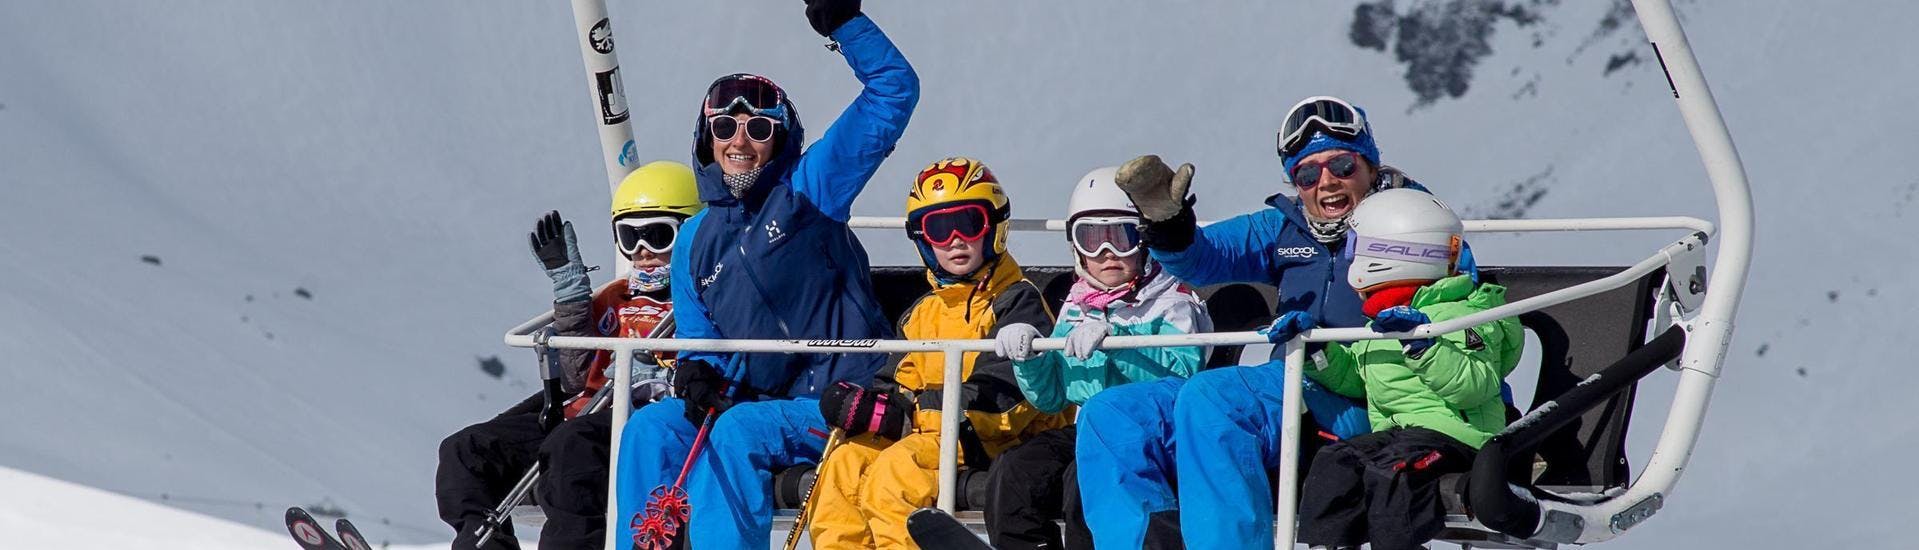 A group of children is riding the chair lift together with their ski instructors from the ski school Ski Cool during their Private Ski Lessons for Kids - School Holiday - All Ages in the ski resort of Val Thorens.